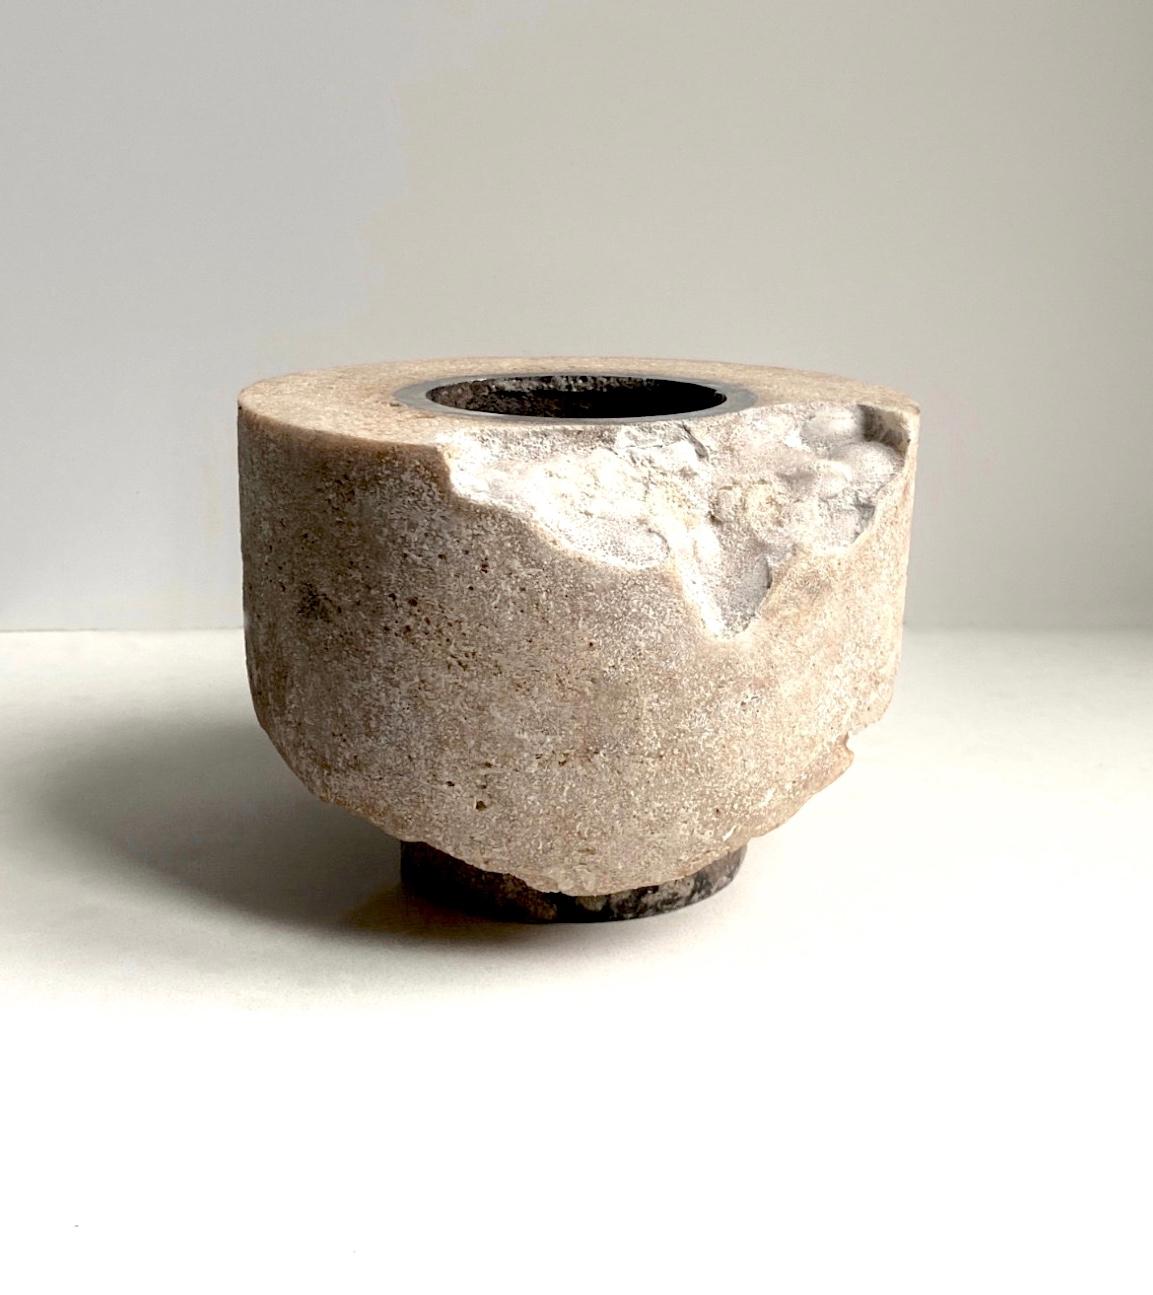 Cored Vessel by Cal Summers
Dimension:  D 15.24 x H 11.43 cm
Materials: Resin and Sawdust Composite with Steel Inset.

Cal Summers is a British designer who makes bespoke handmade furniture and contemporary artefacts in which he challenges the